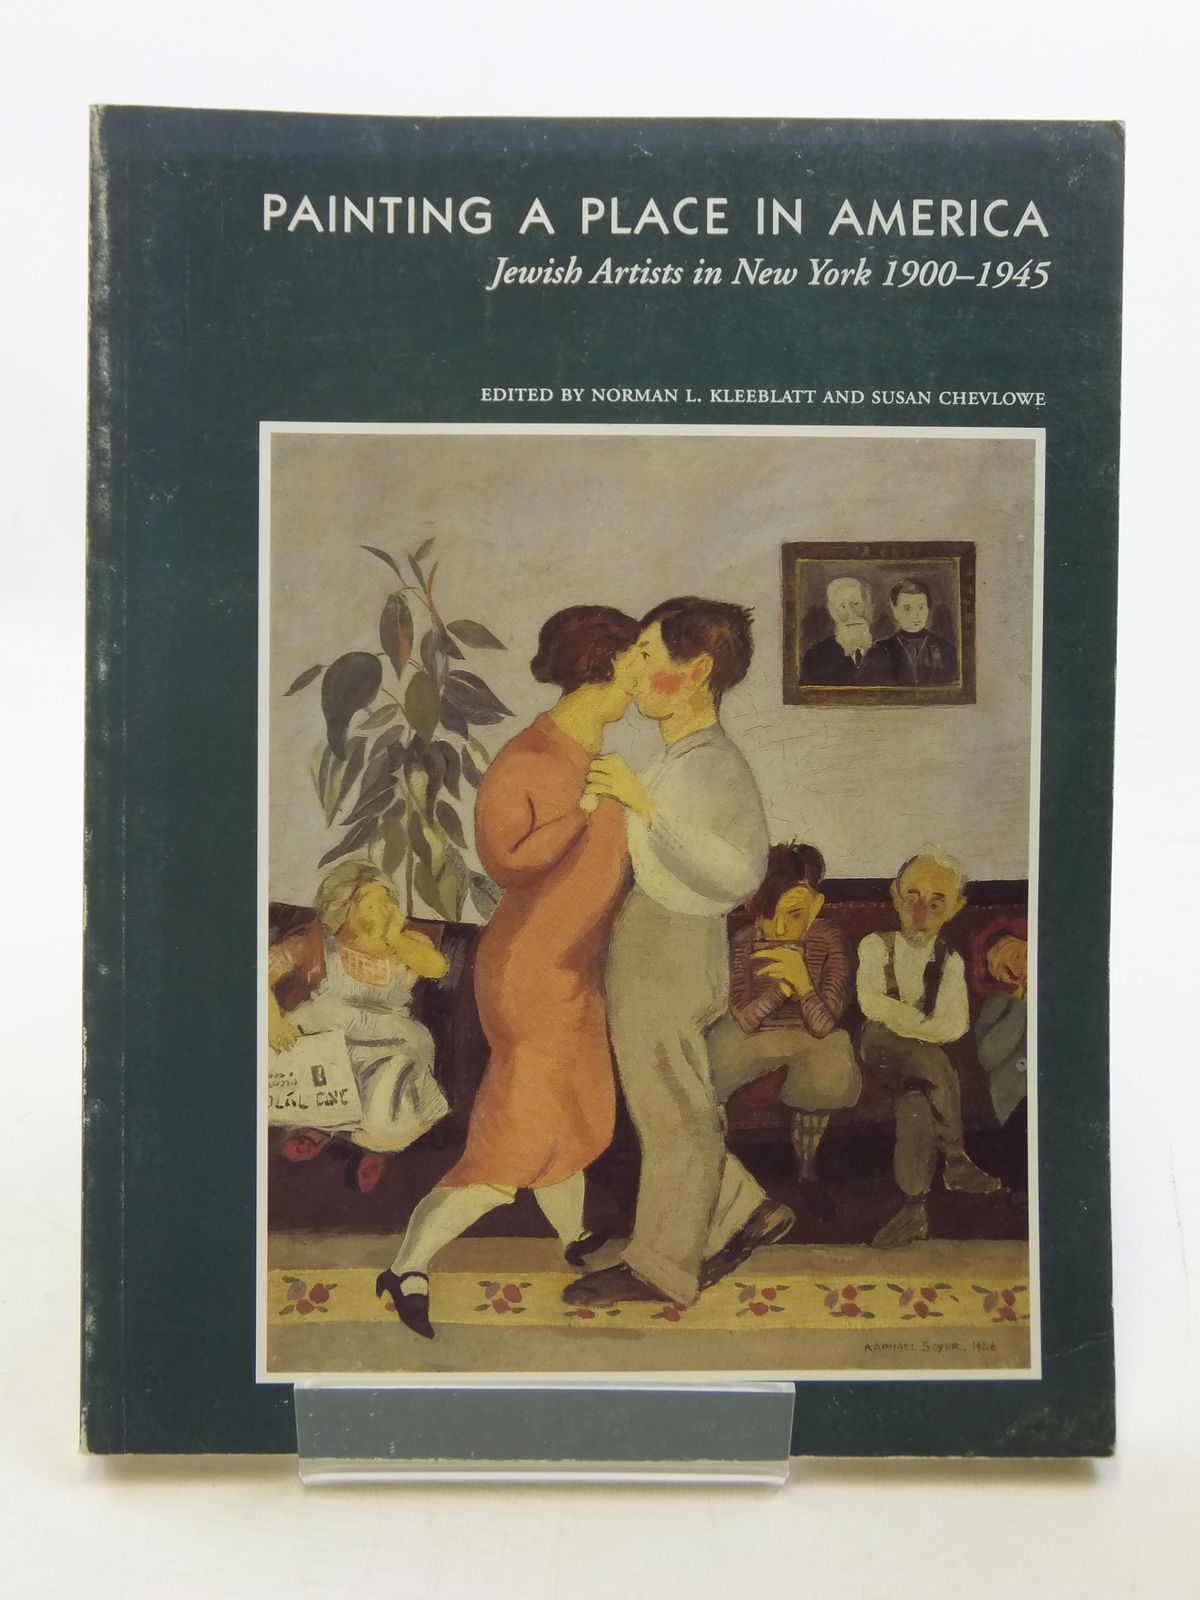 Photo of PAINTING A PLACE IN AMERICA written by Kleeblatt, Norman L. Chevlowe, Susan published by The Jewish Museum, Indiana University Press (STOCK CODE: 1208024)  for sale by Stella & Rose's Books